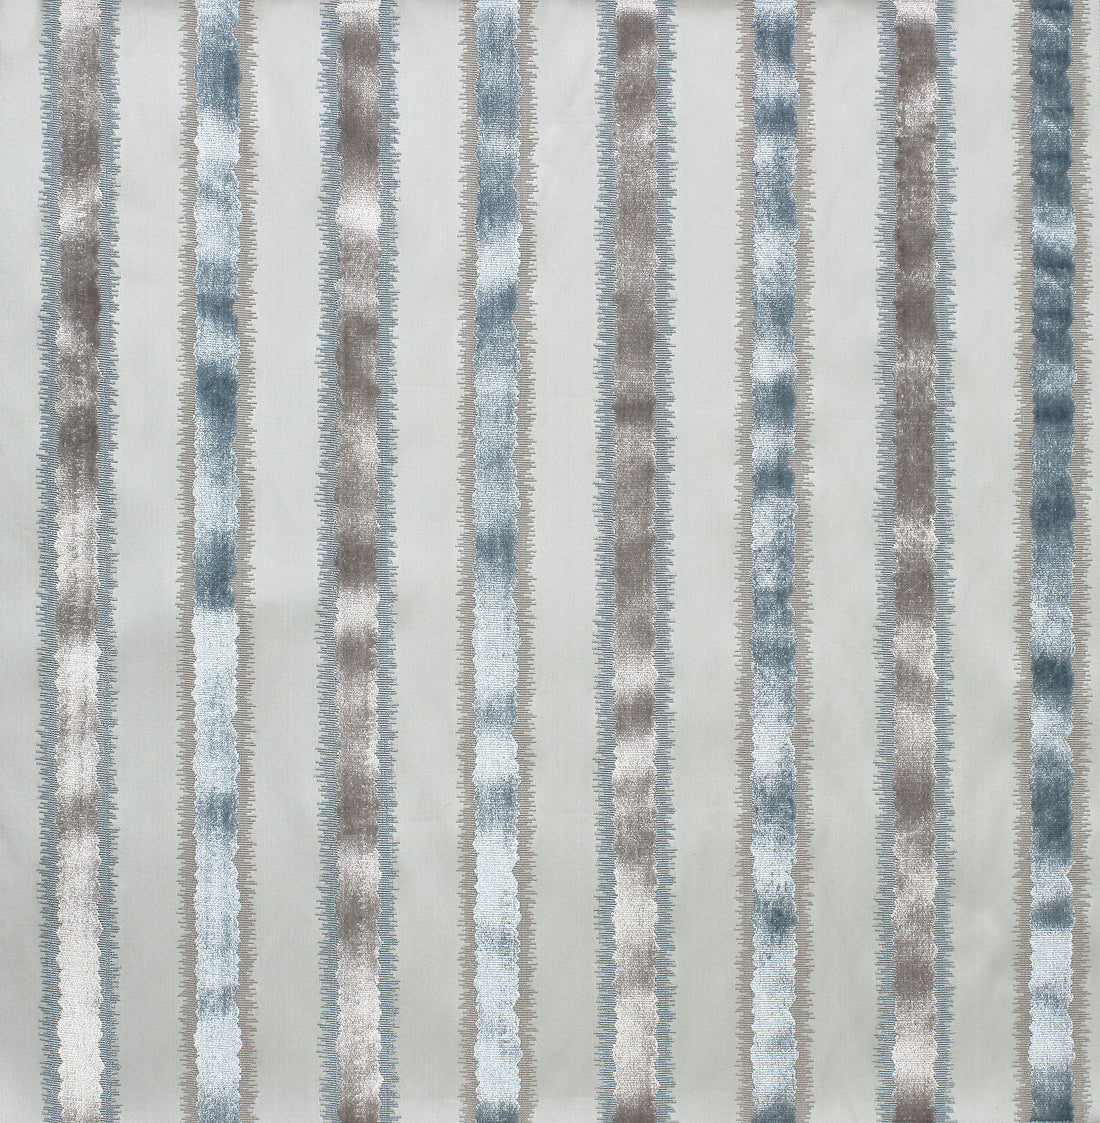 Tai Lao Stripe fabric in mist color - pattern number ZS 0001VELZ - by Scalamandre in the Old World Weavers collection